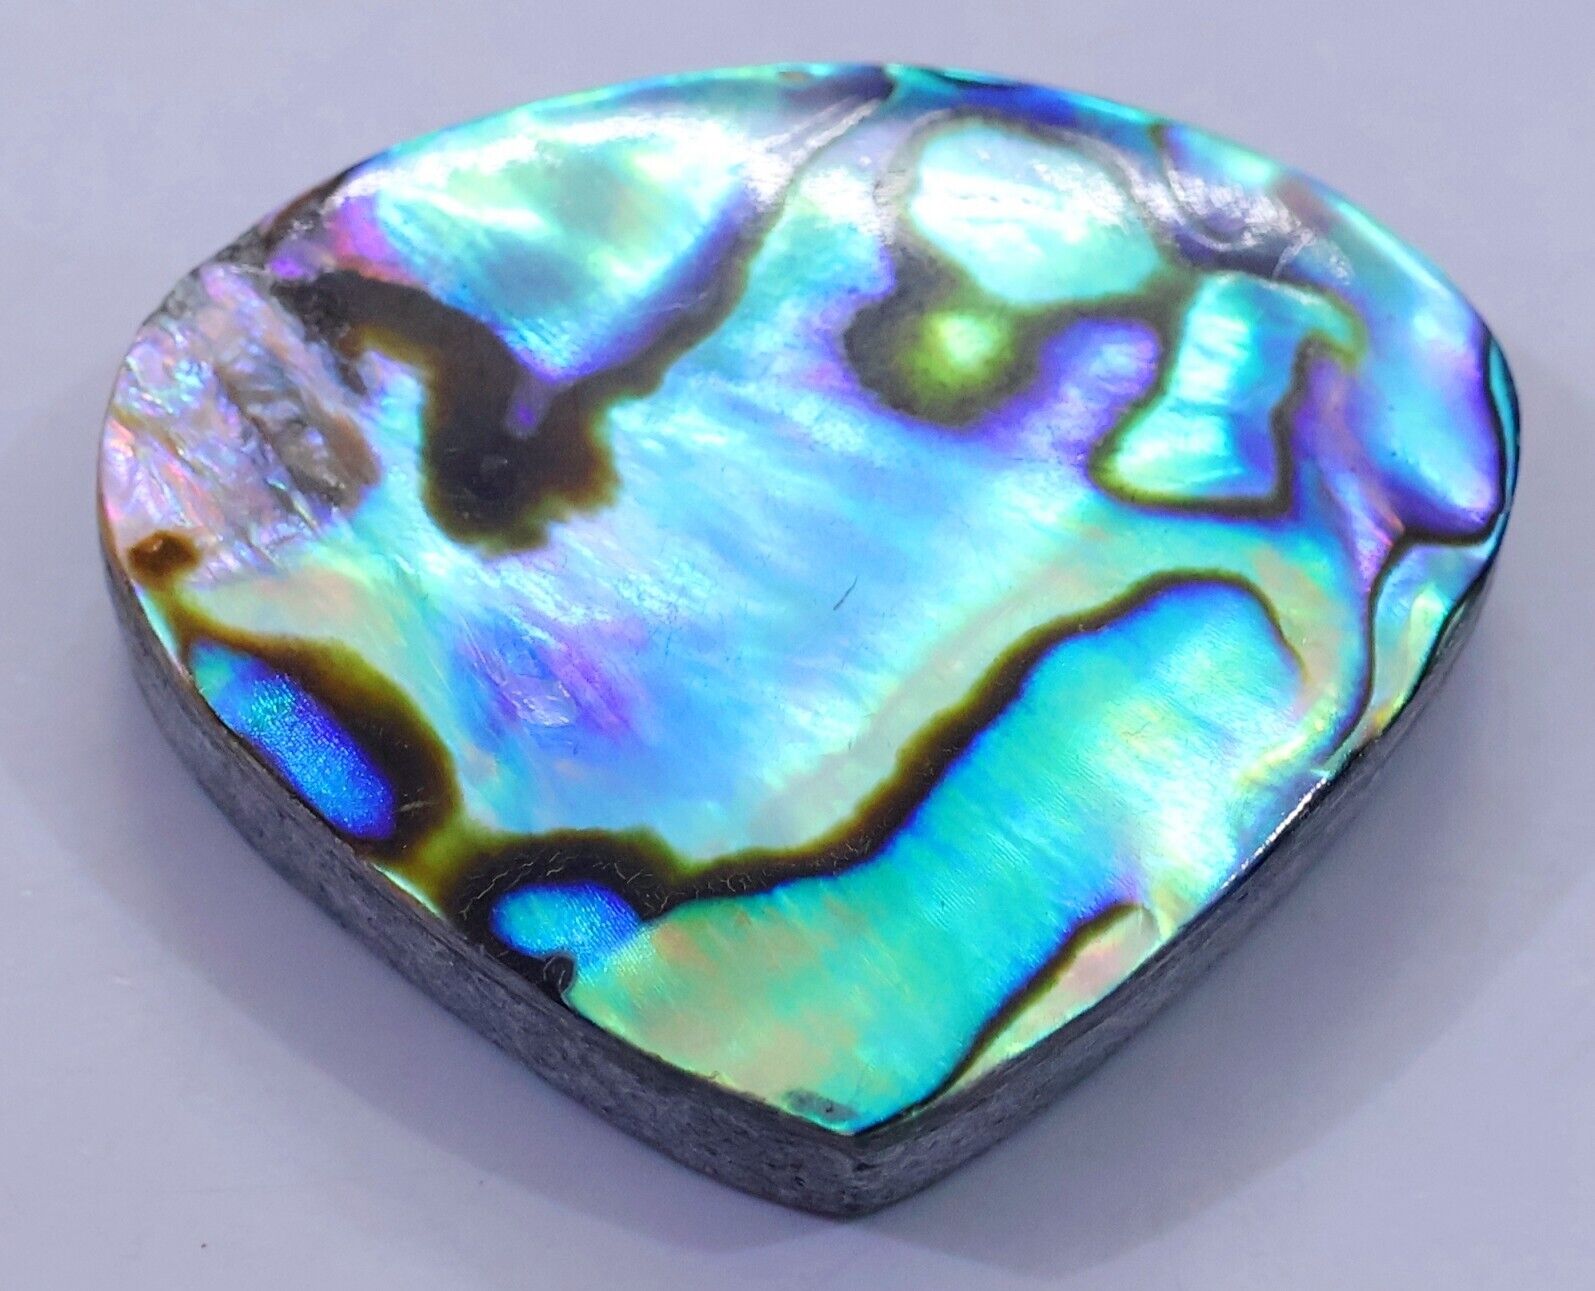 43 CT 100% NATURAL RAINBOW FIRE ABALONE SHELL PEAR CABOCHON GEMSTONE EM-686